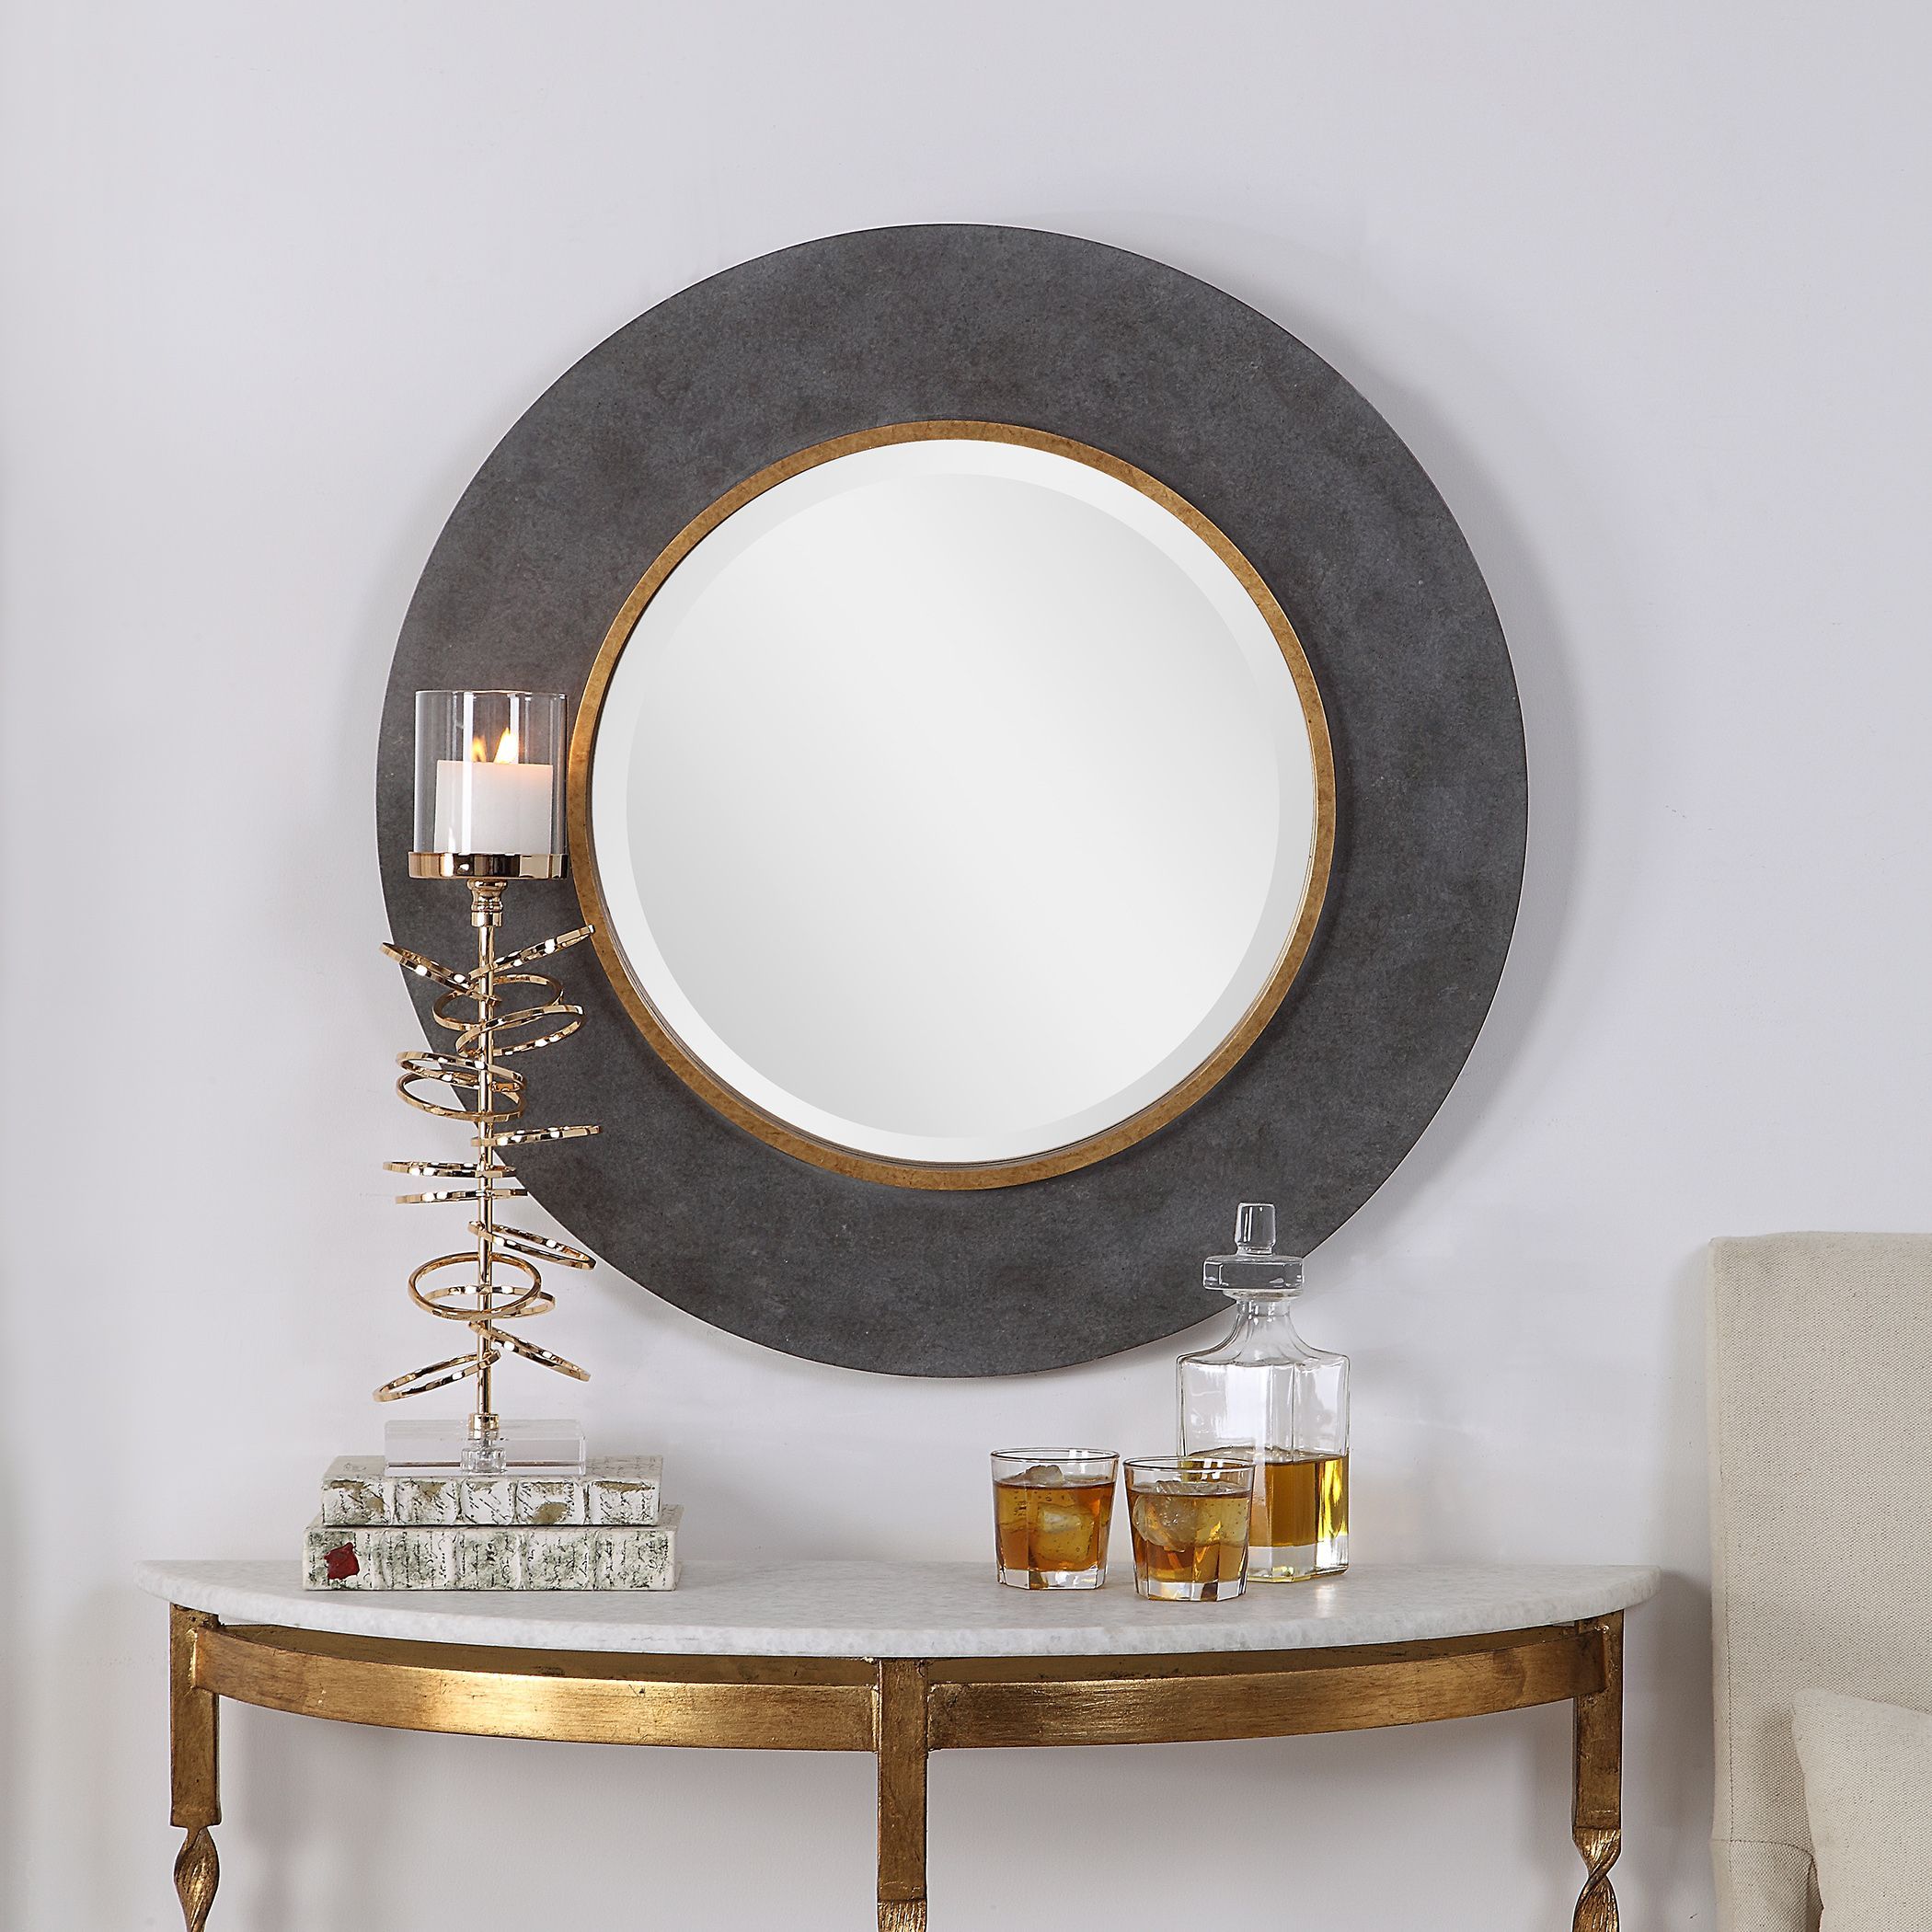 Large Round Wood Beveled Wall Mirror Contemporary Charcoal Concrete Throughout Charcoal Gray Wall Mirrors (View 14 of 15)